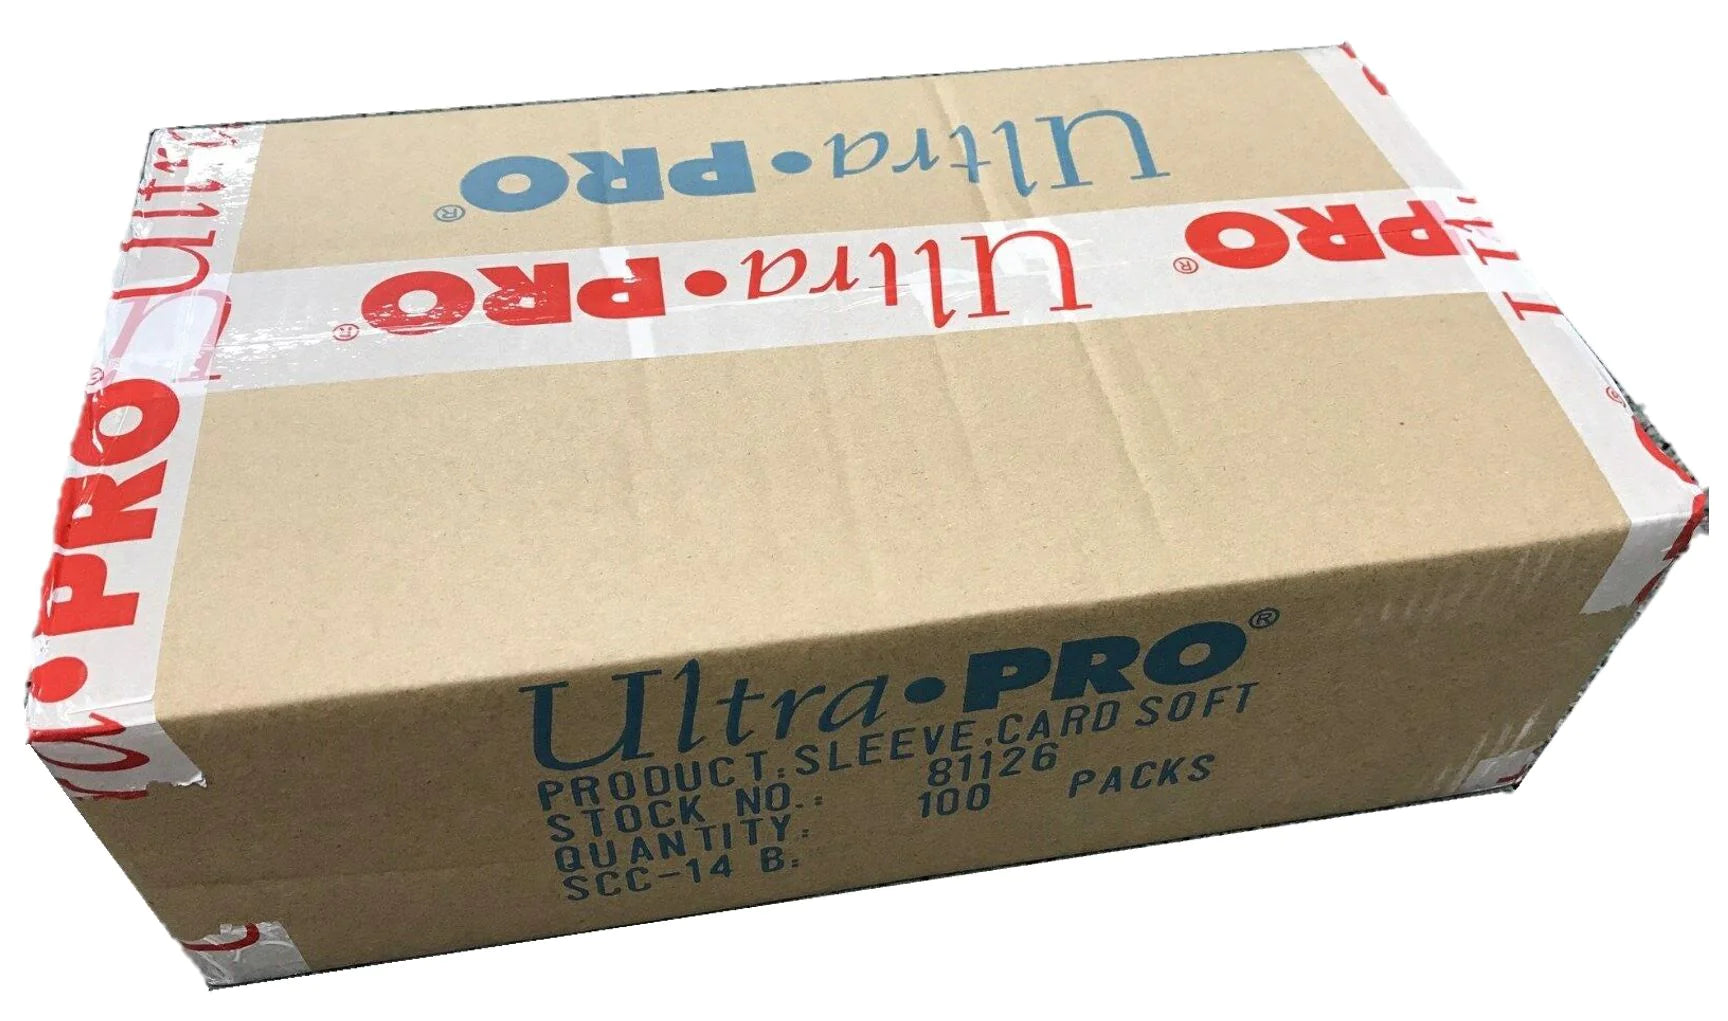 Ultra Pro Soft Card Sleeves 2 5/8" x 3 5/8" Case (Case of 100 Packs) - Miraj Trading